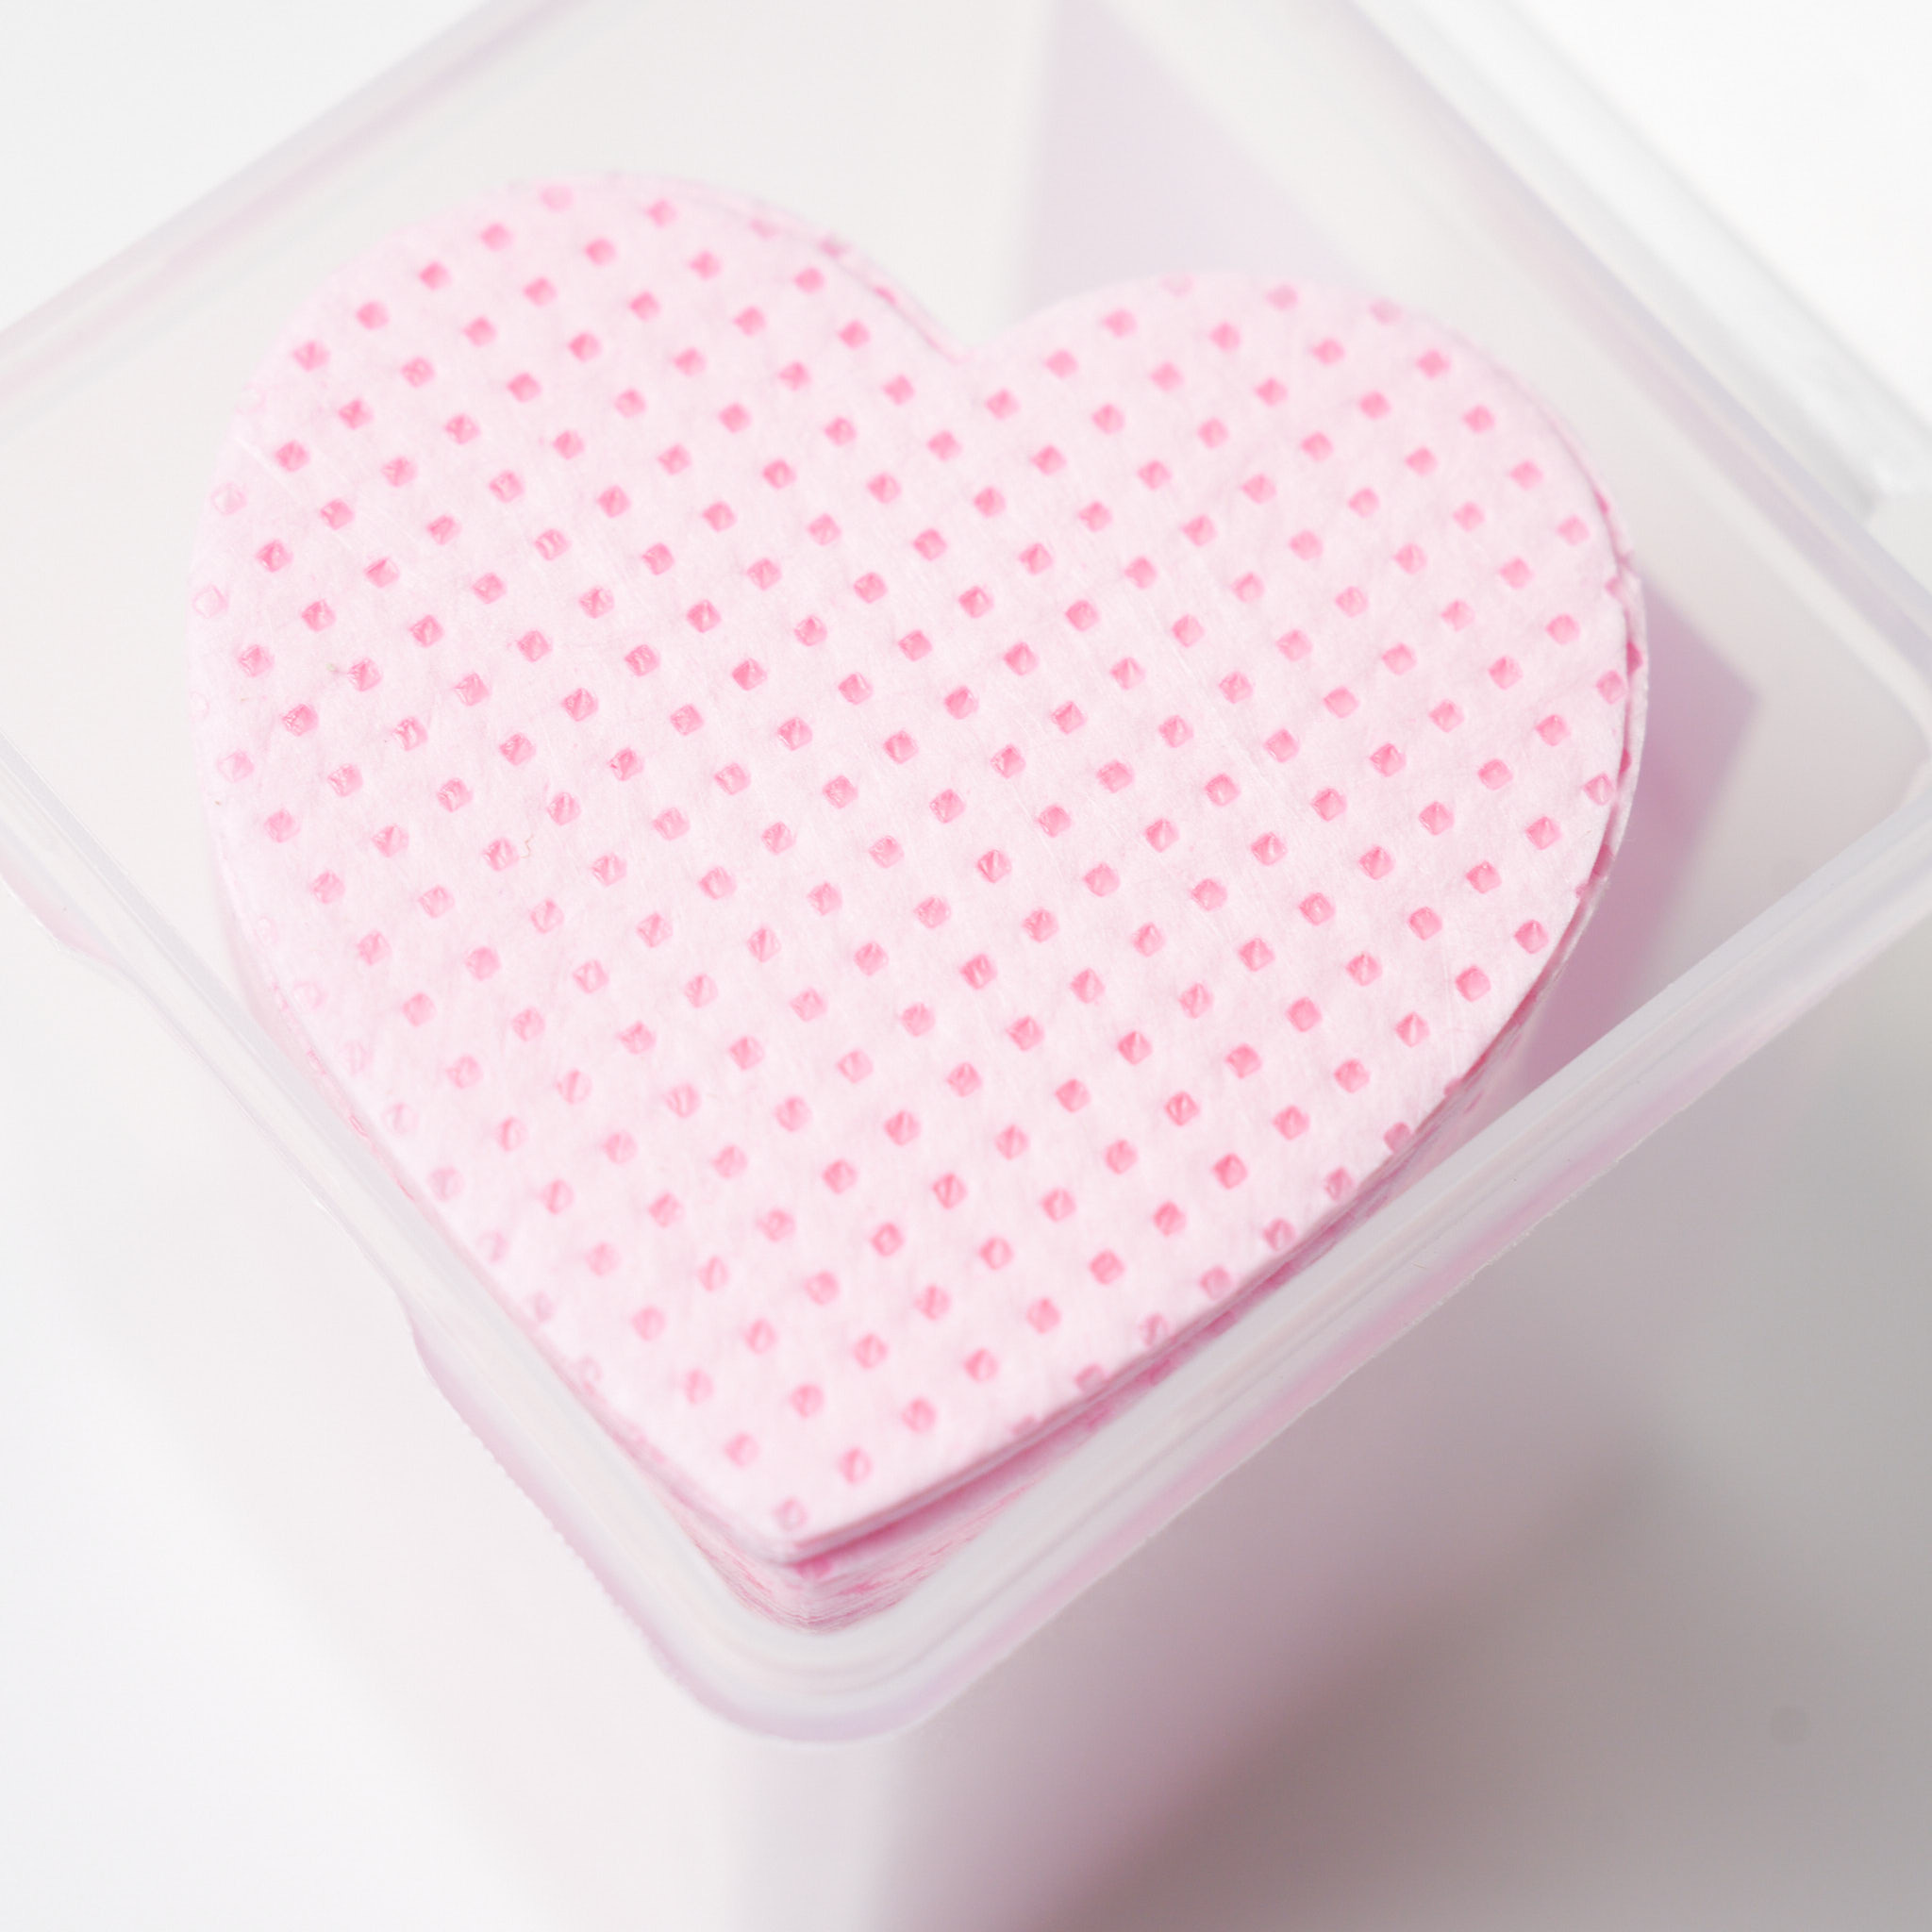 Heart Shaped Lint free wipes (200 pieces) – Sassy Lash Supplies